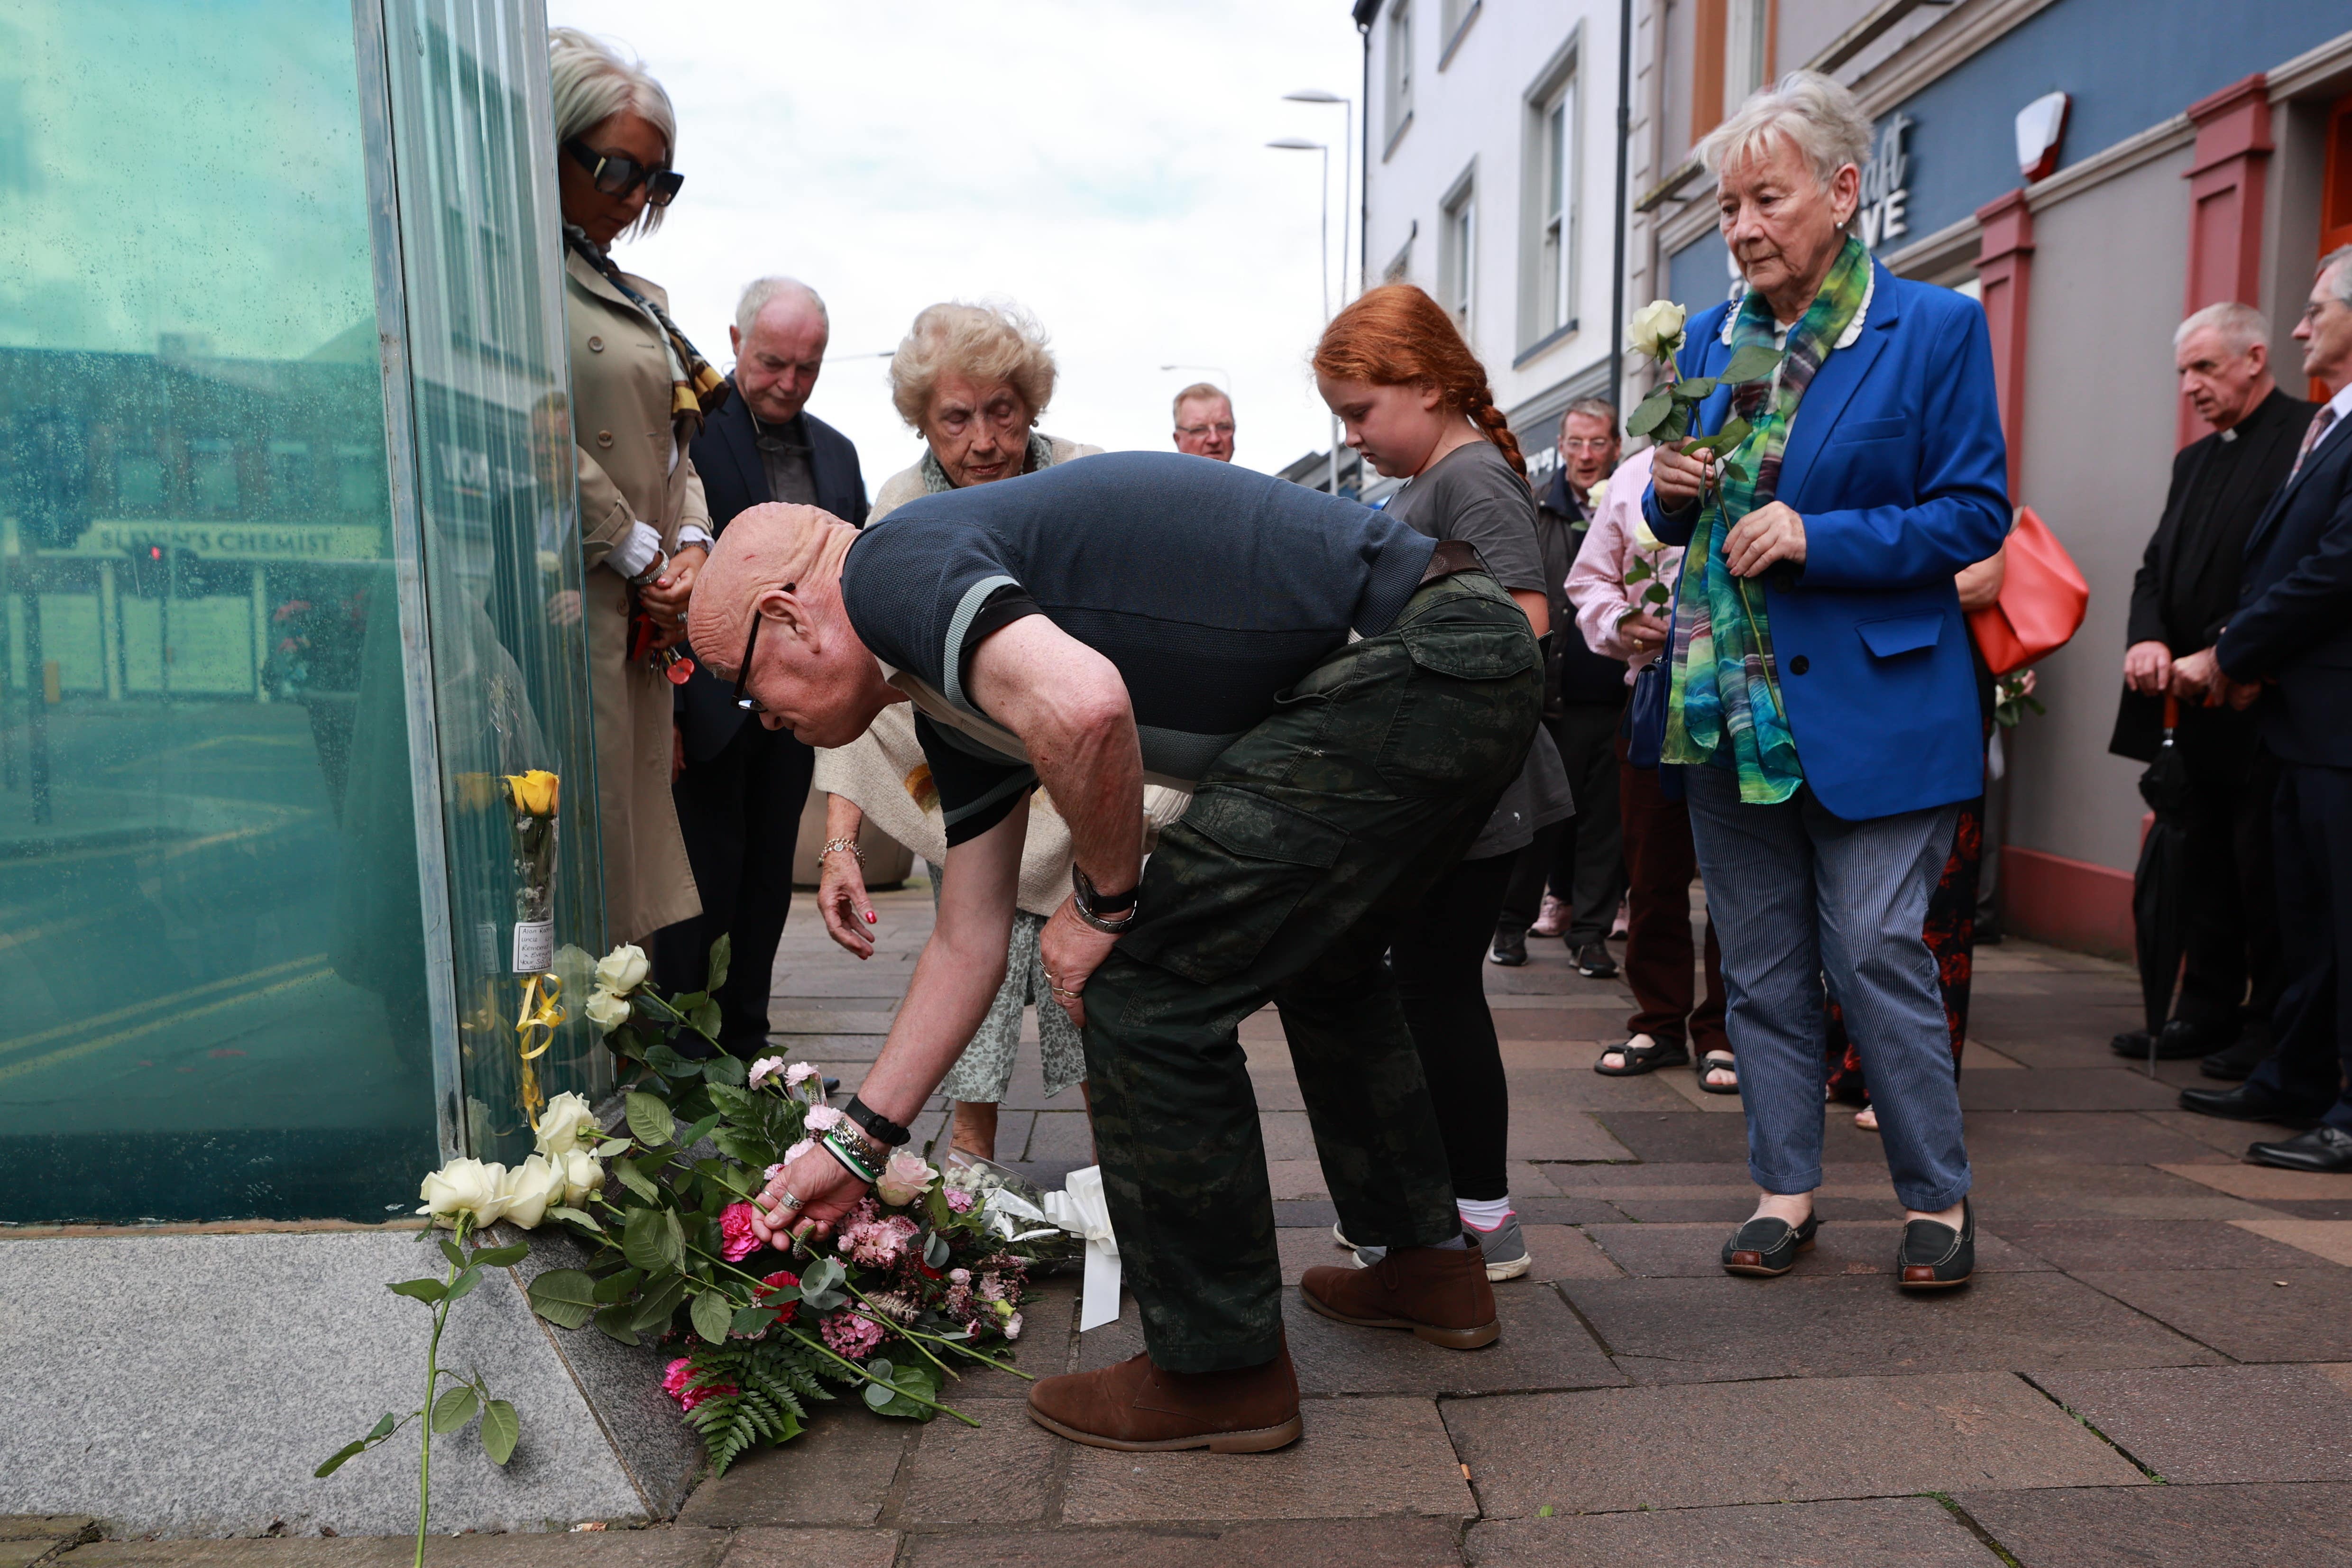 Kevin Skeldon, whose wife Philomena died in the Omagh atrocity, lays flowers at the site of the bombing to mark the 25th anniversary (Liam McBurney/PA)